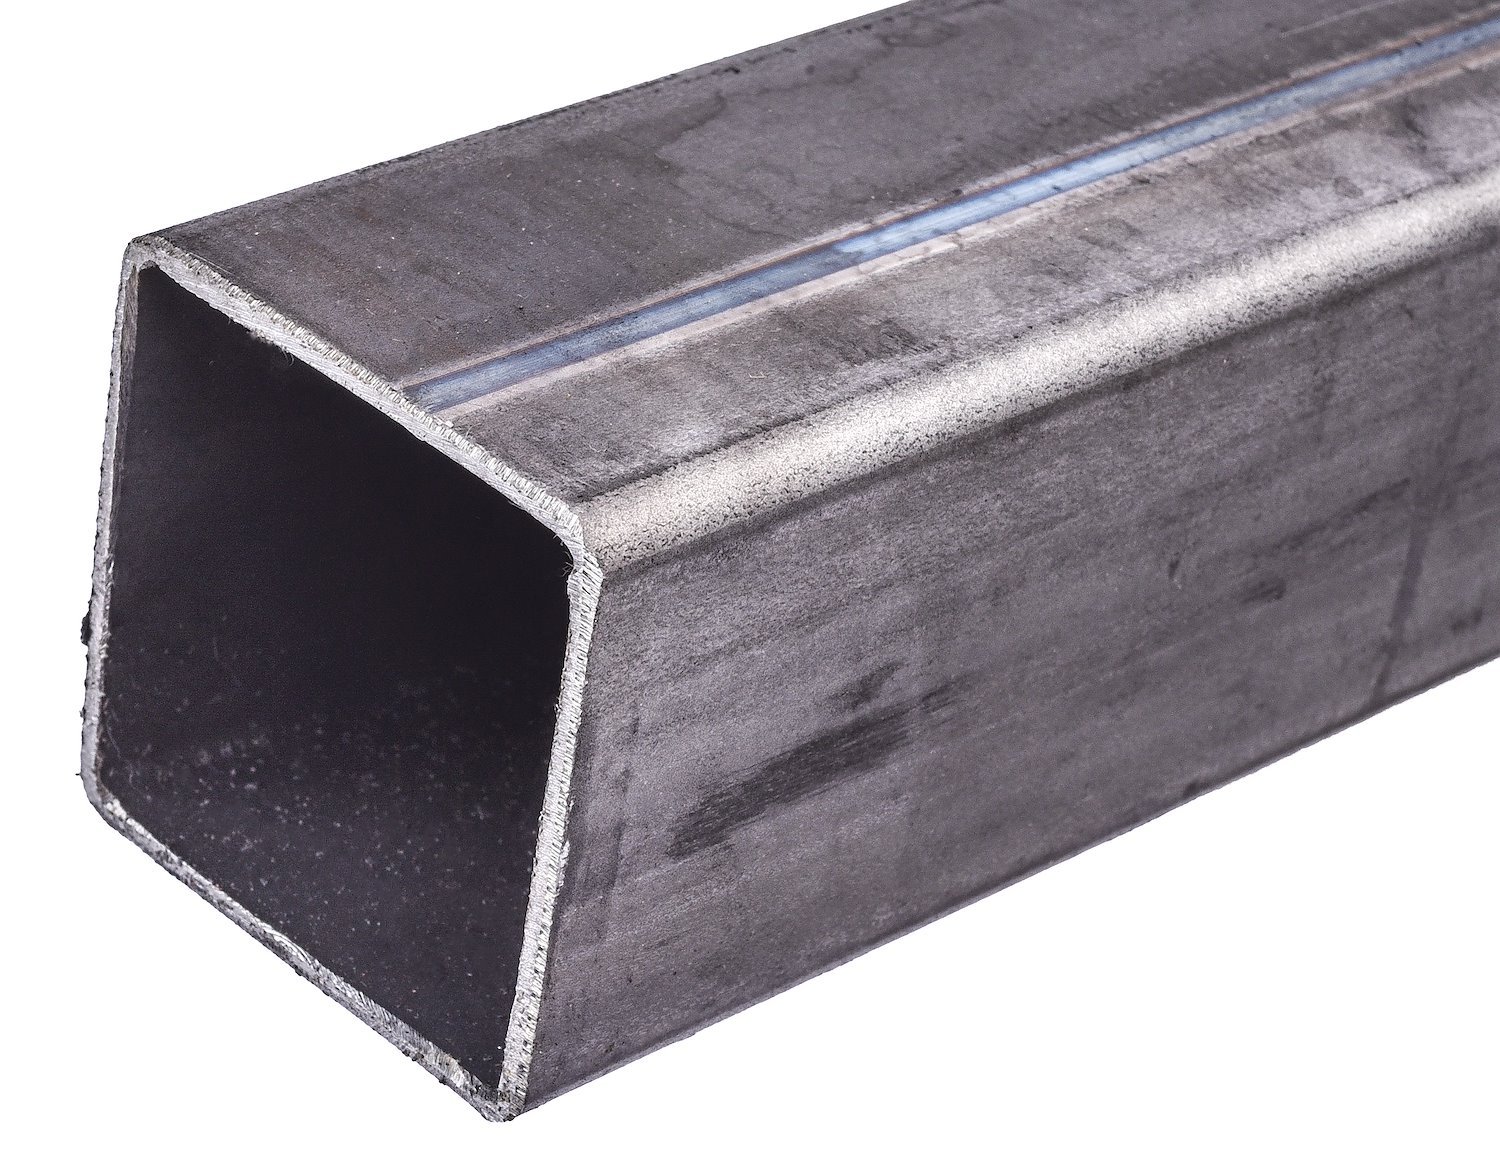 Mild Steel Tubing [Square, 2 in. Width x 0.083 in. Thickness x 4 ft. Length]